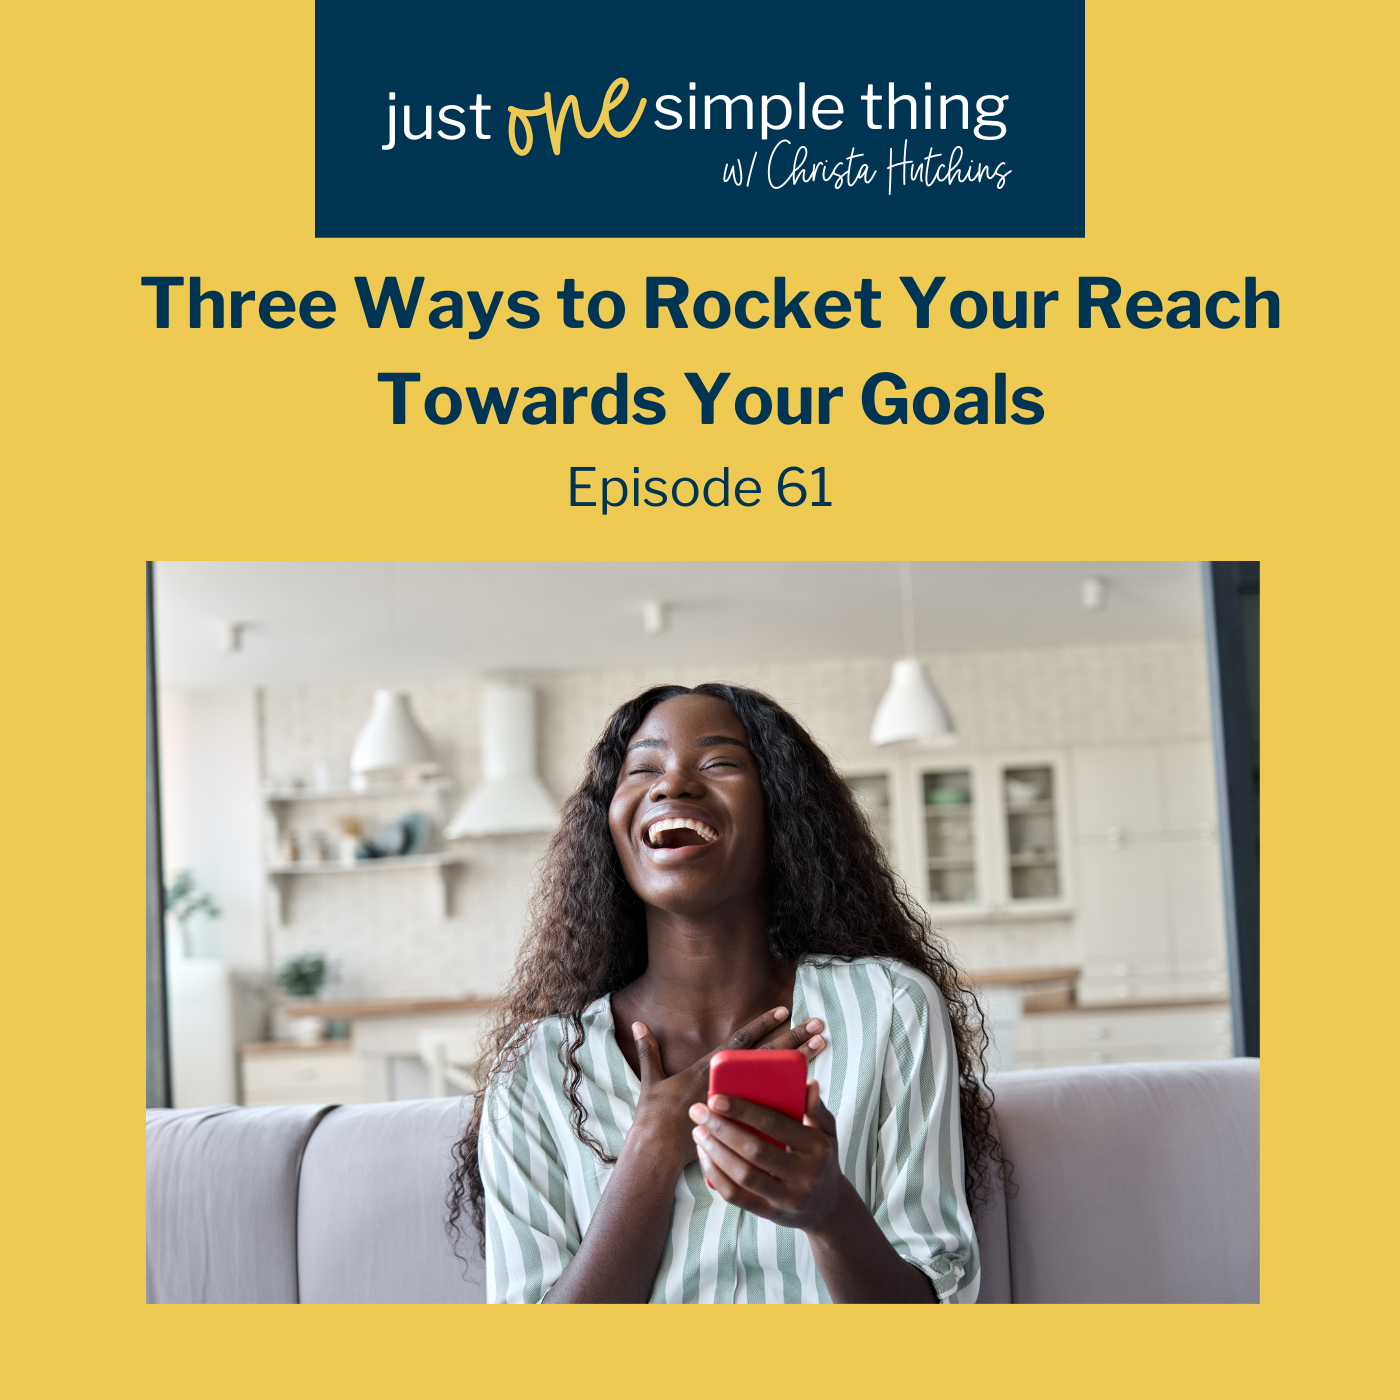 Three Ways to Rocket Your Reach Towards Your Goals